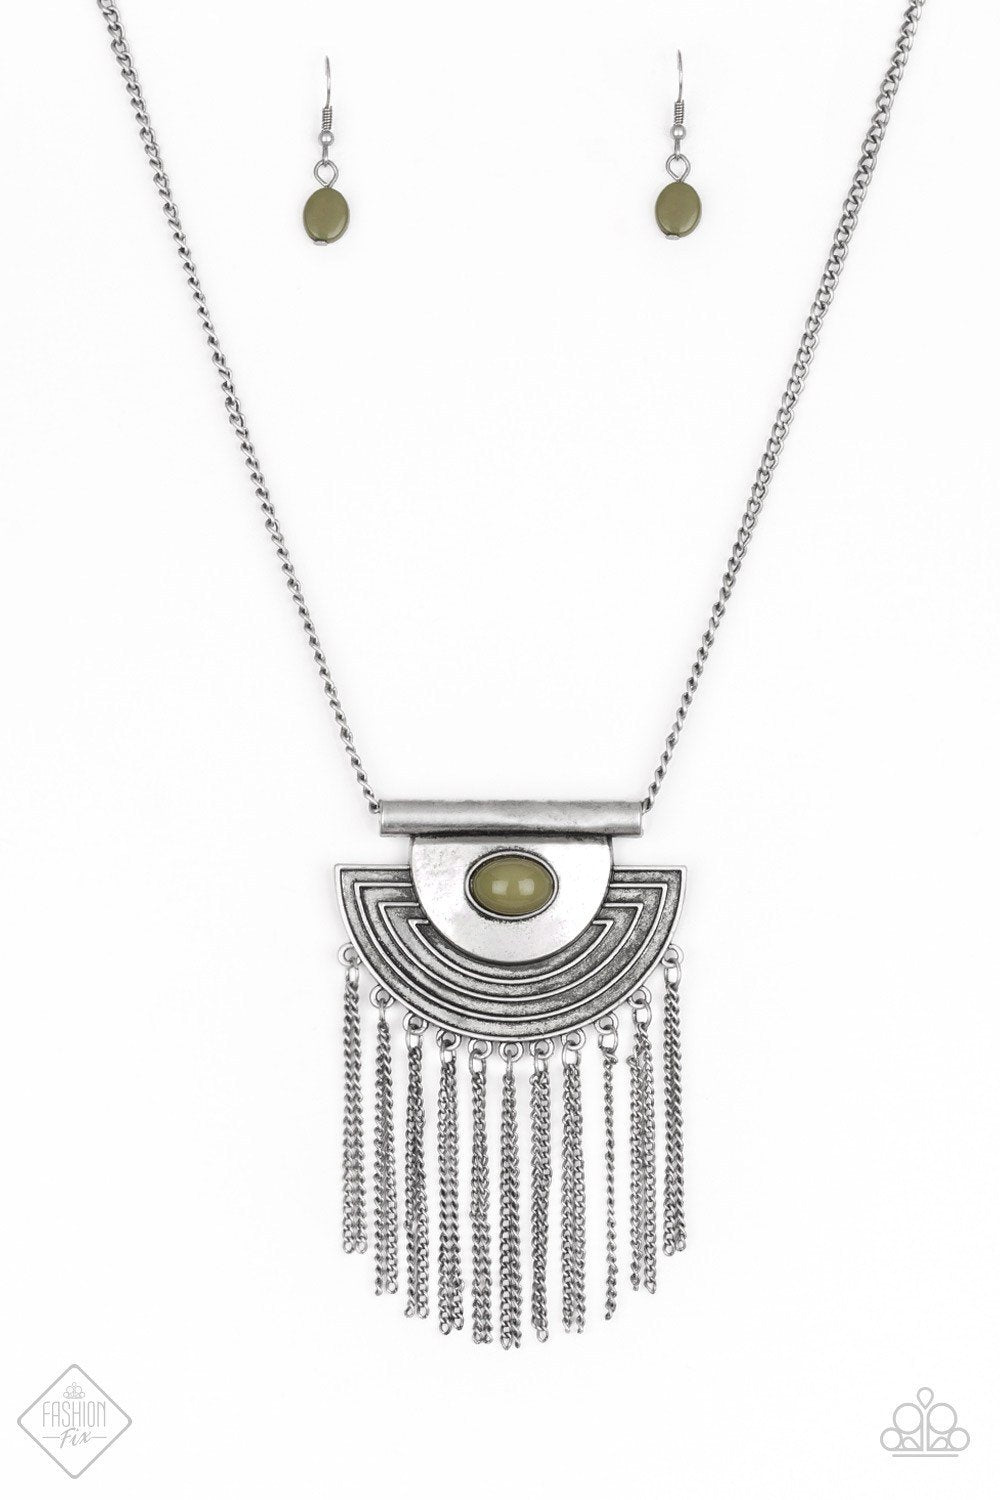 When In ROAM Green and Silver Necklace - Paparazzi Accessories - lightbox -CarasShop.com - $5 Jewelry by Cara Jewels